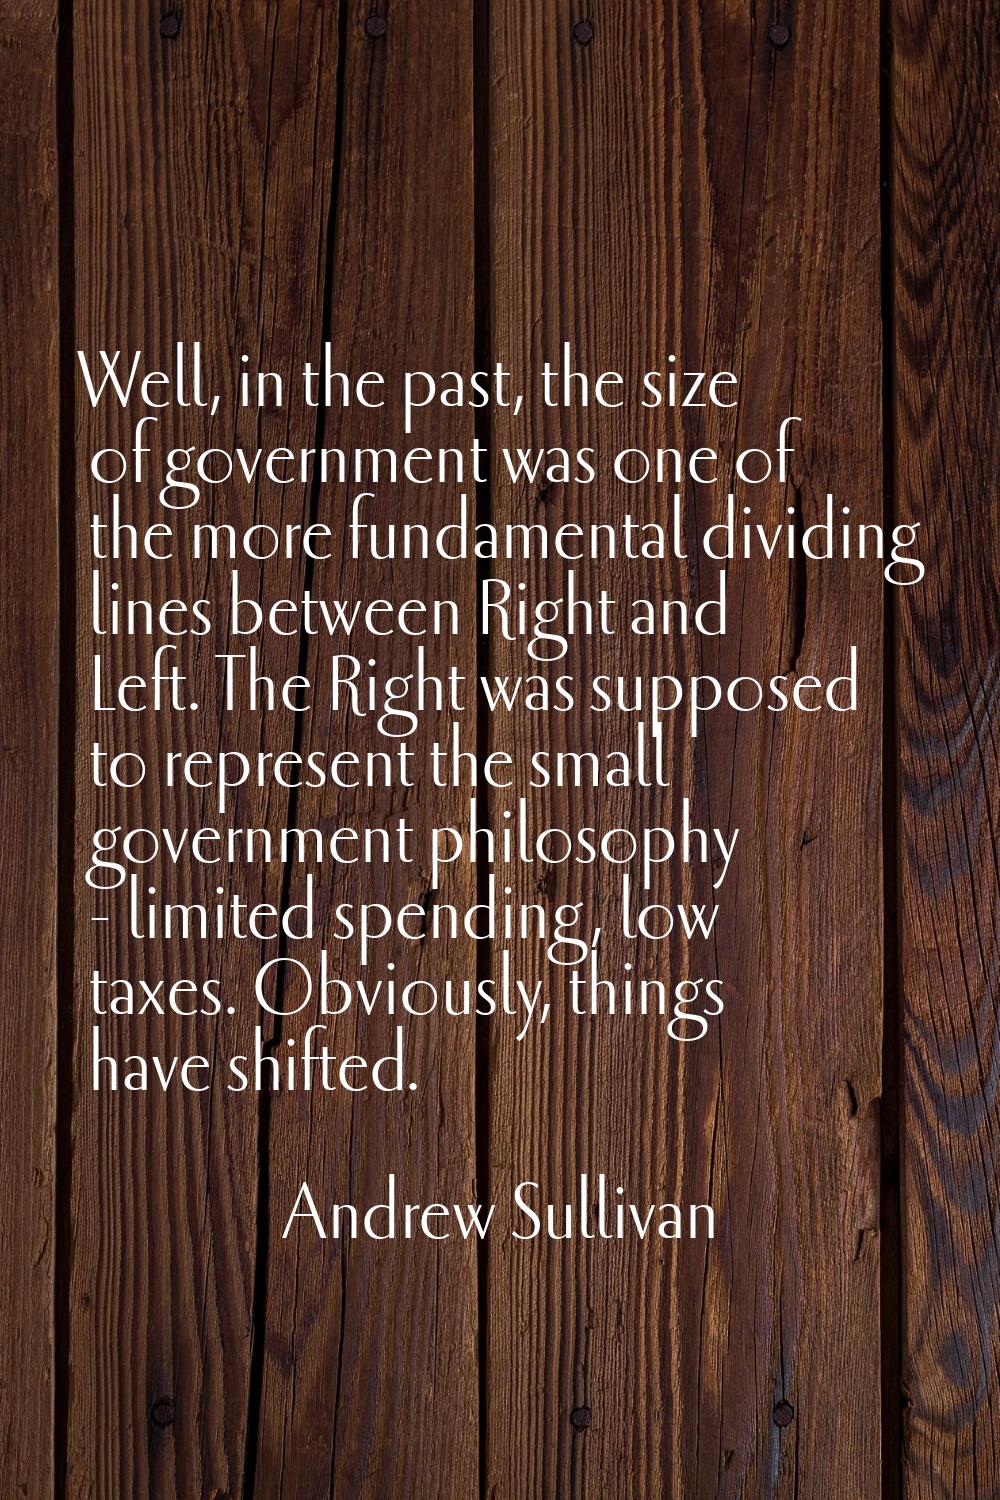 Well, in the past, the size of government was one of the more fundamental dividing lines between Ri